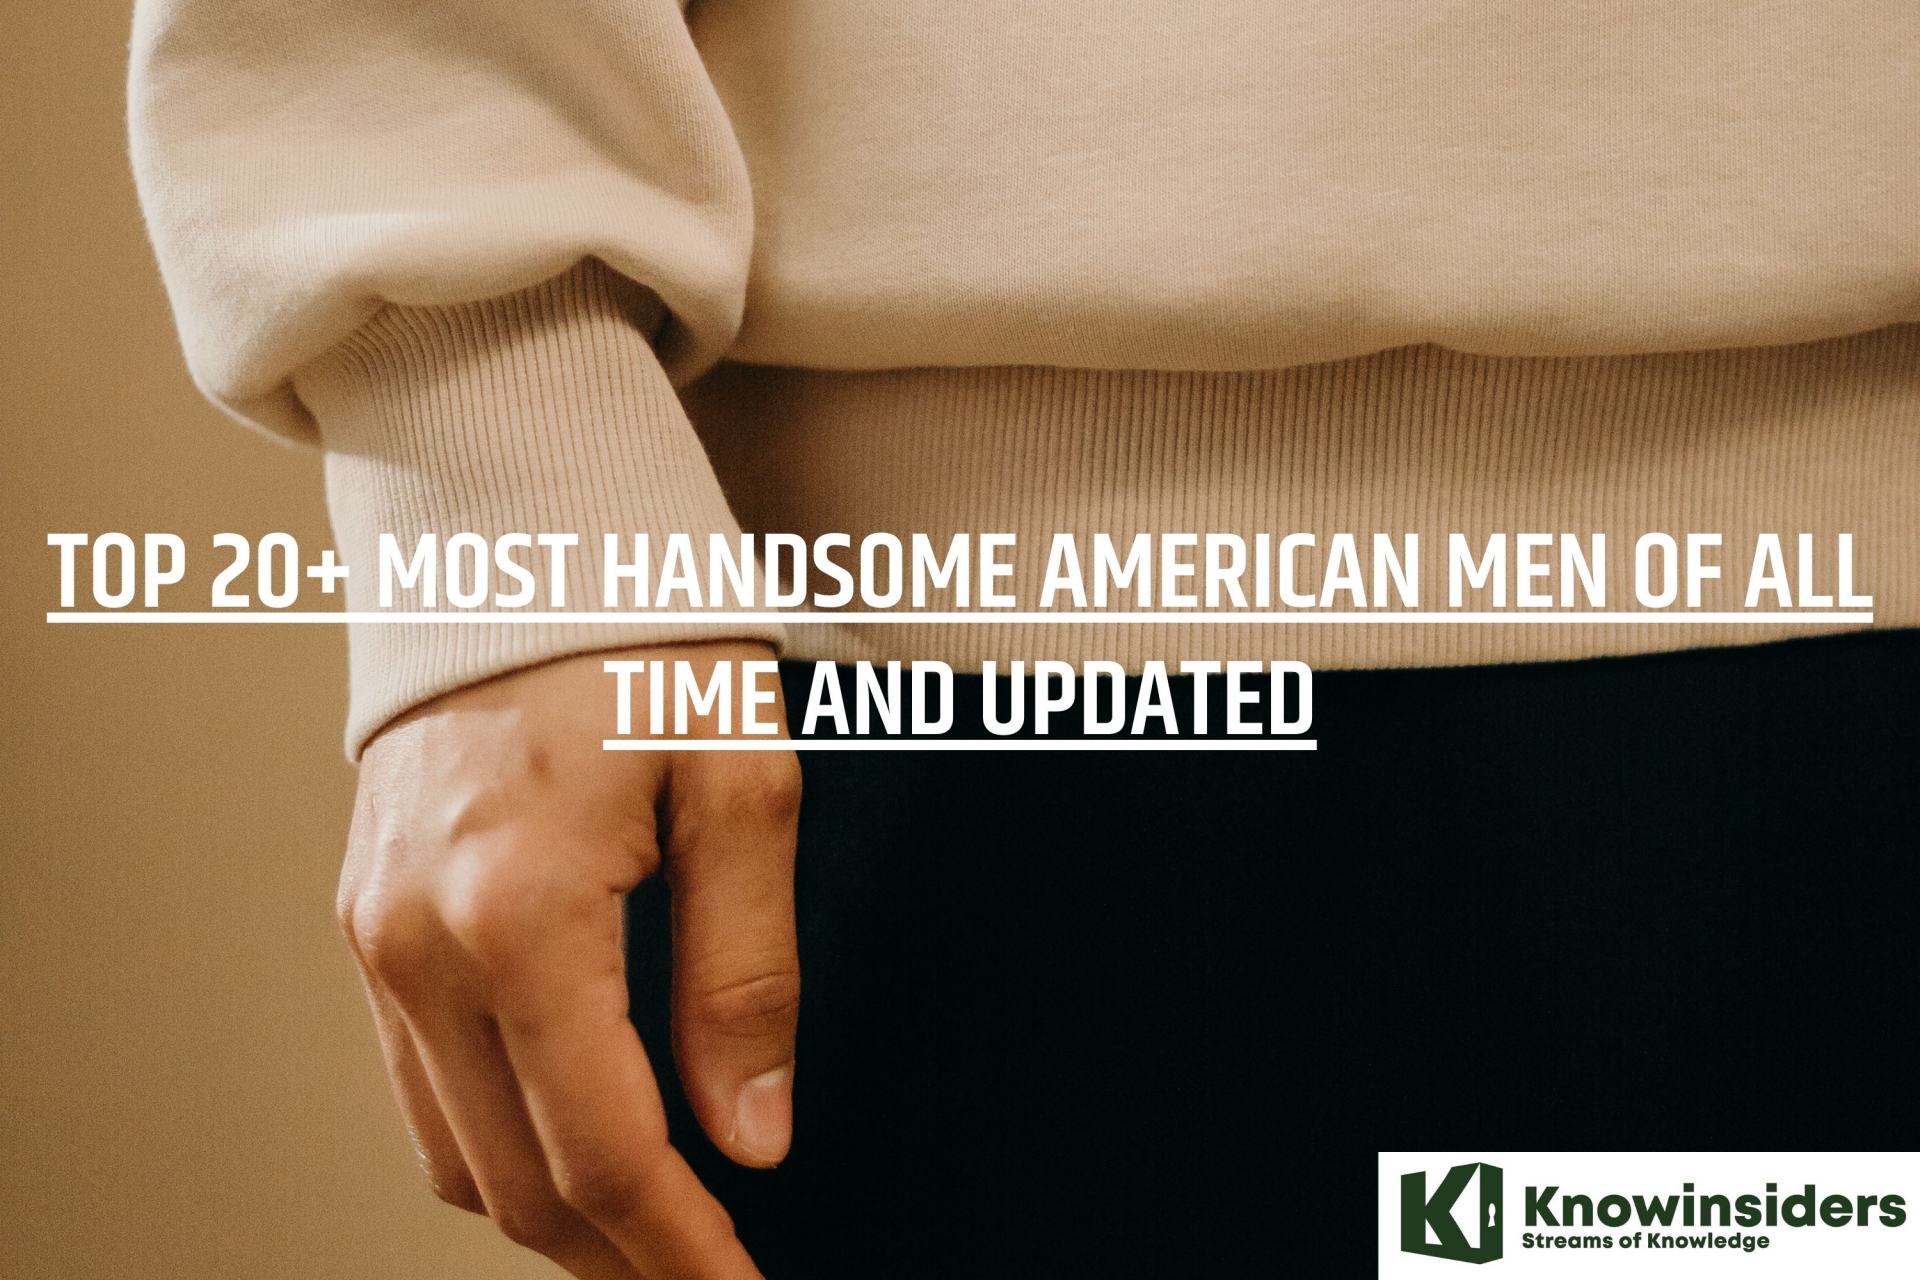 Top 20 Most Handsome American Men of All Time